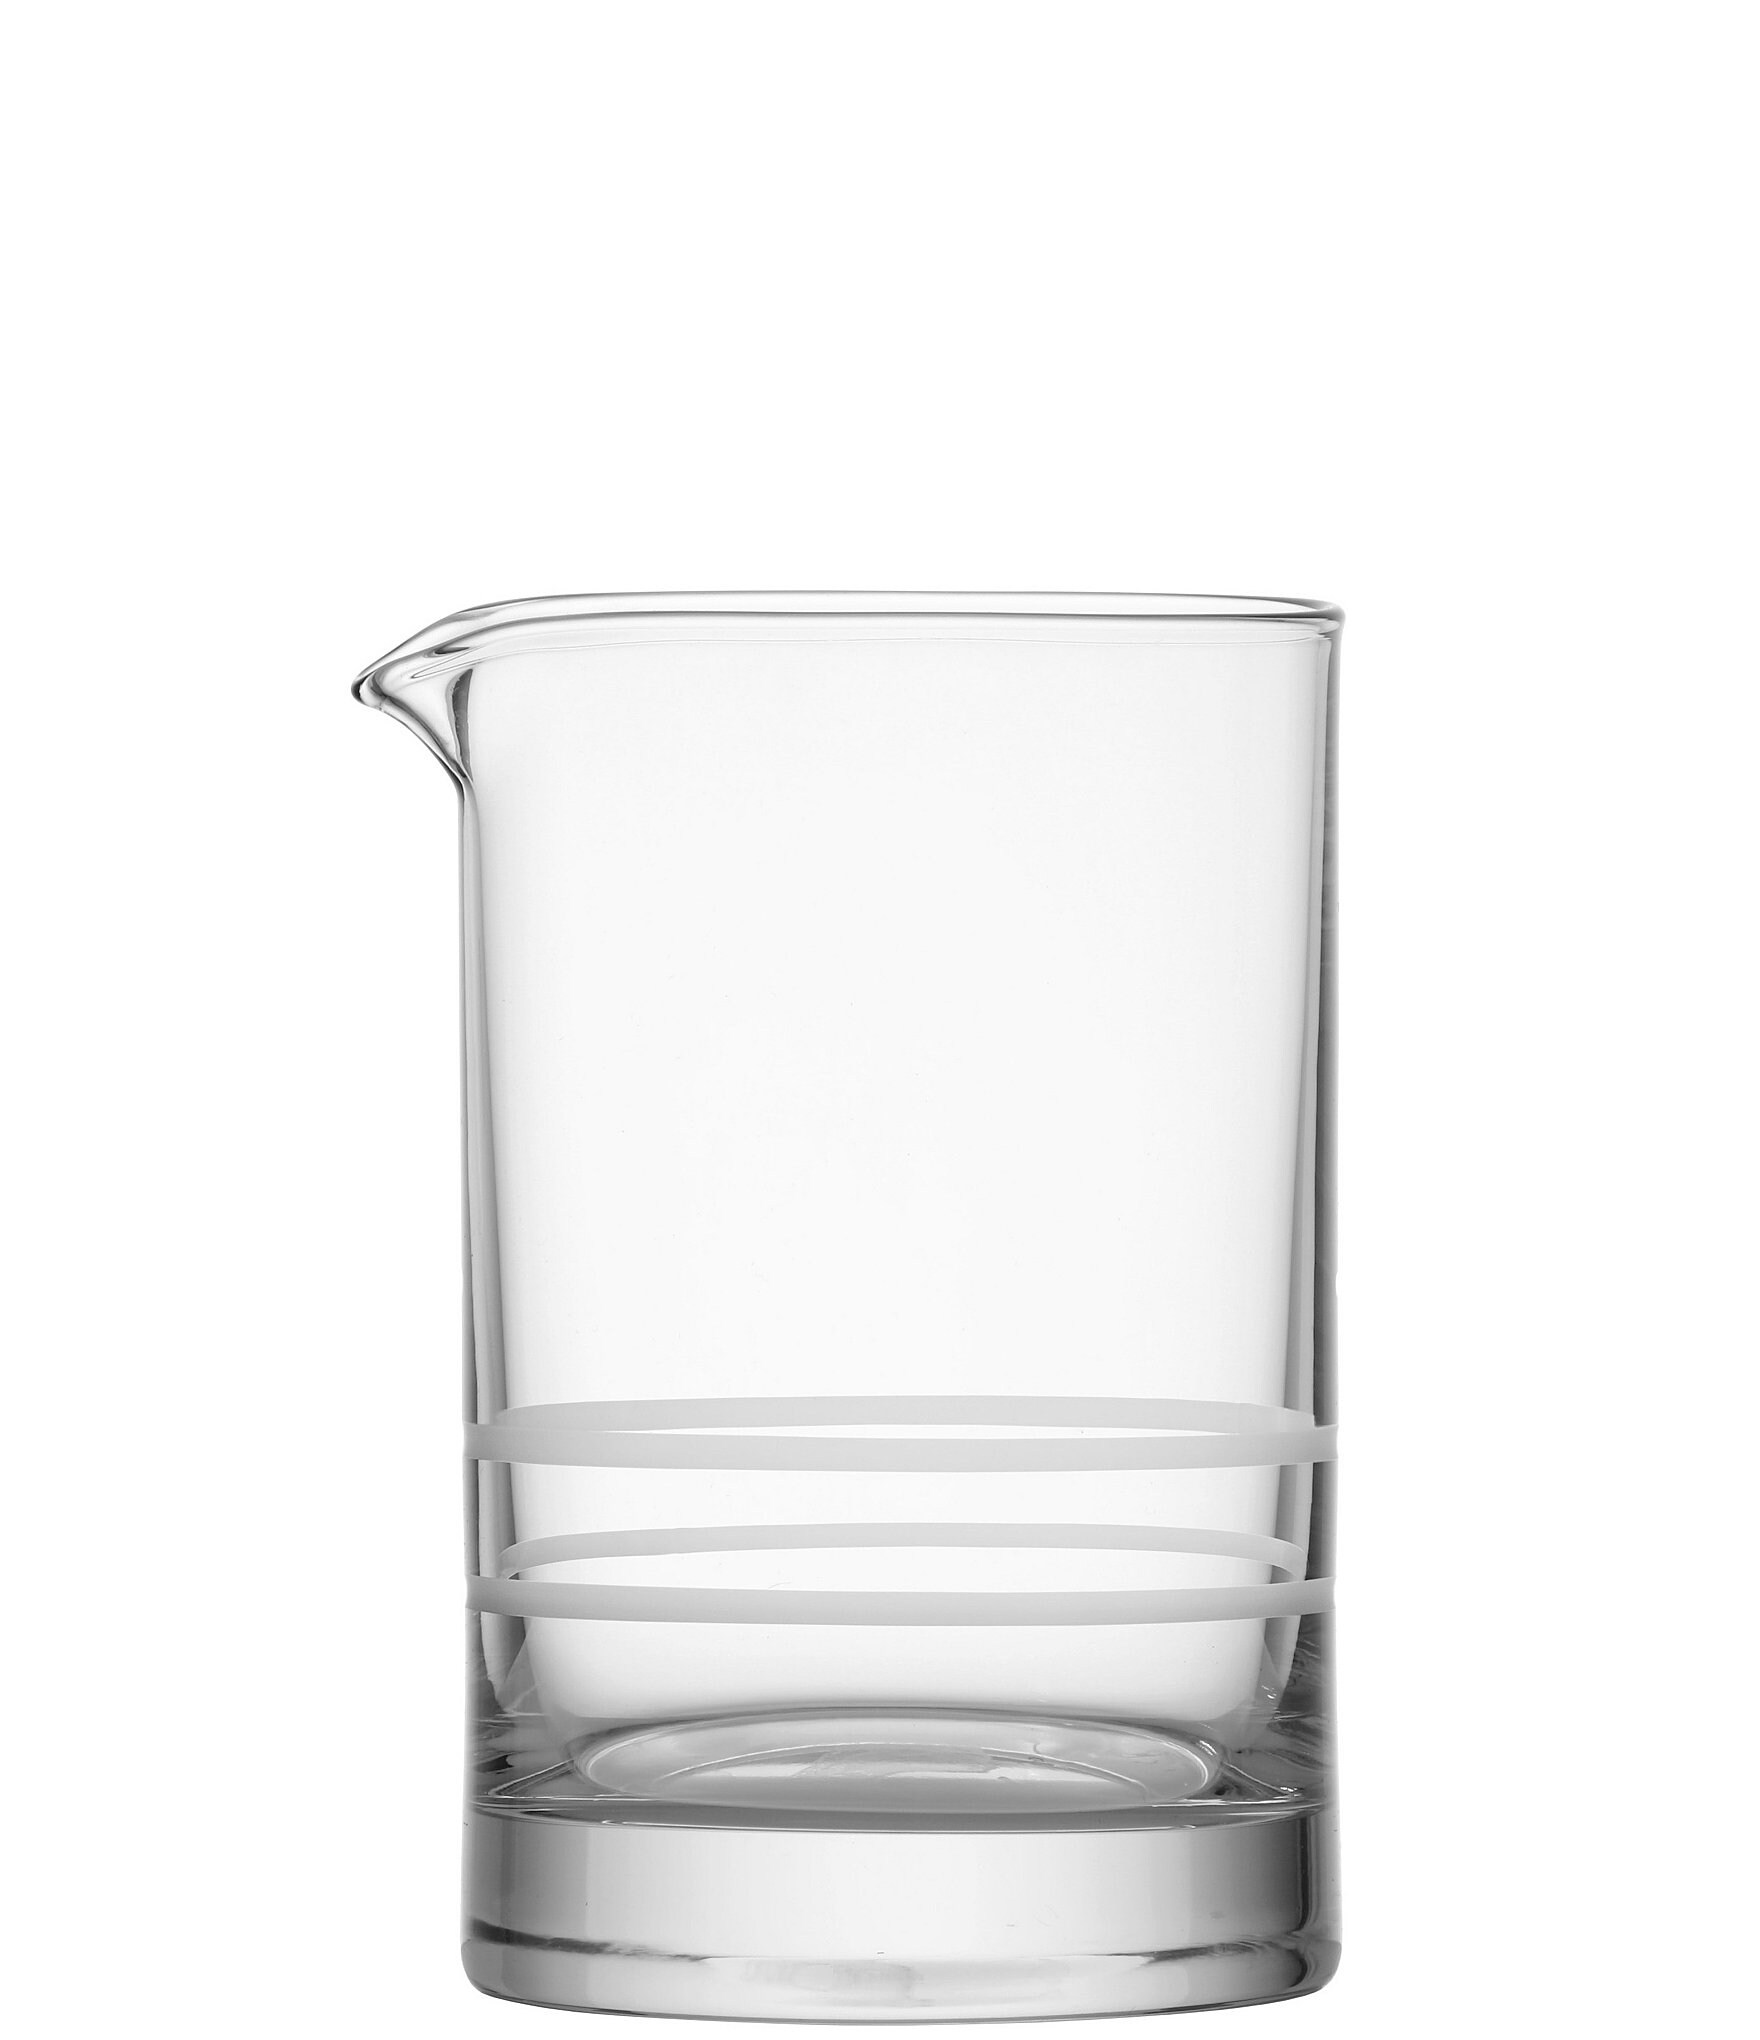 https://dimg.dillards.com/is/image/DillardsZoom/zoom/crafthouse-by-fortessa-the-signature-collection-mixing-glass/00000000_zi_20367585.jpg